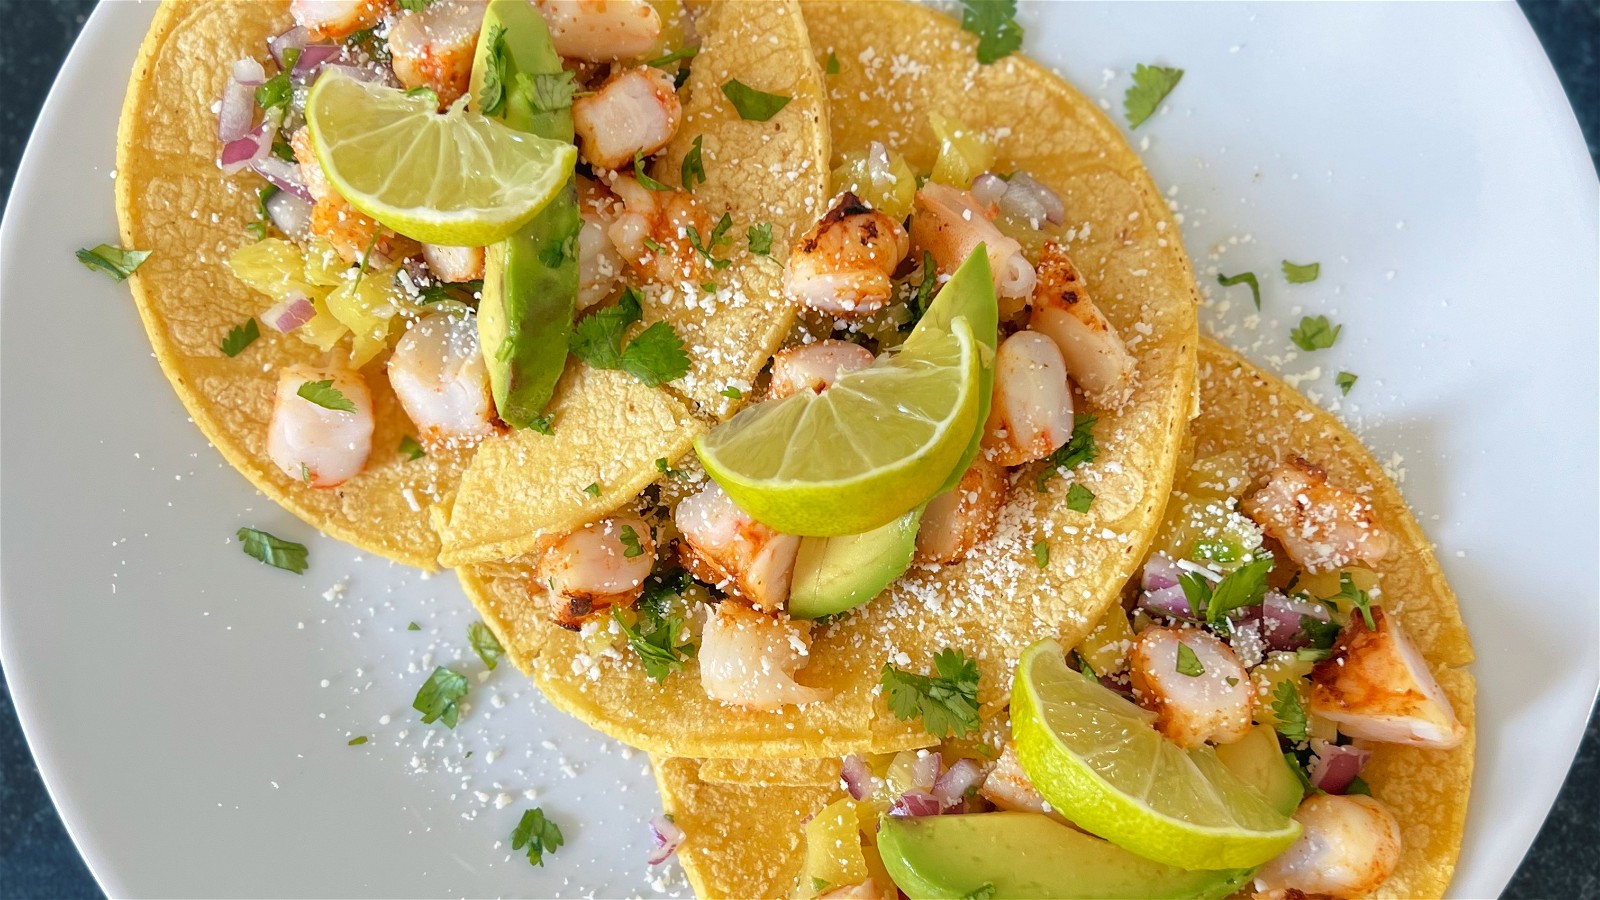 Image of Spot Prawn Tacos with Pineapple Salsa